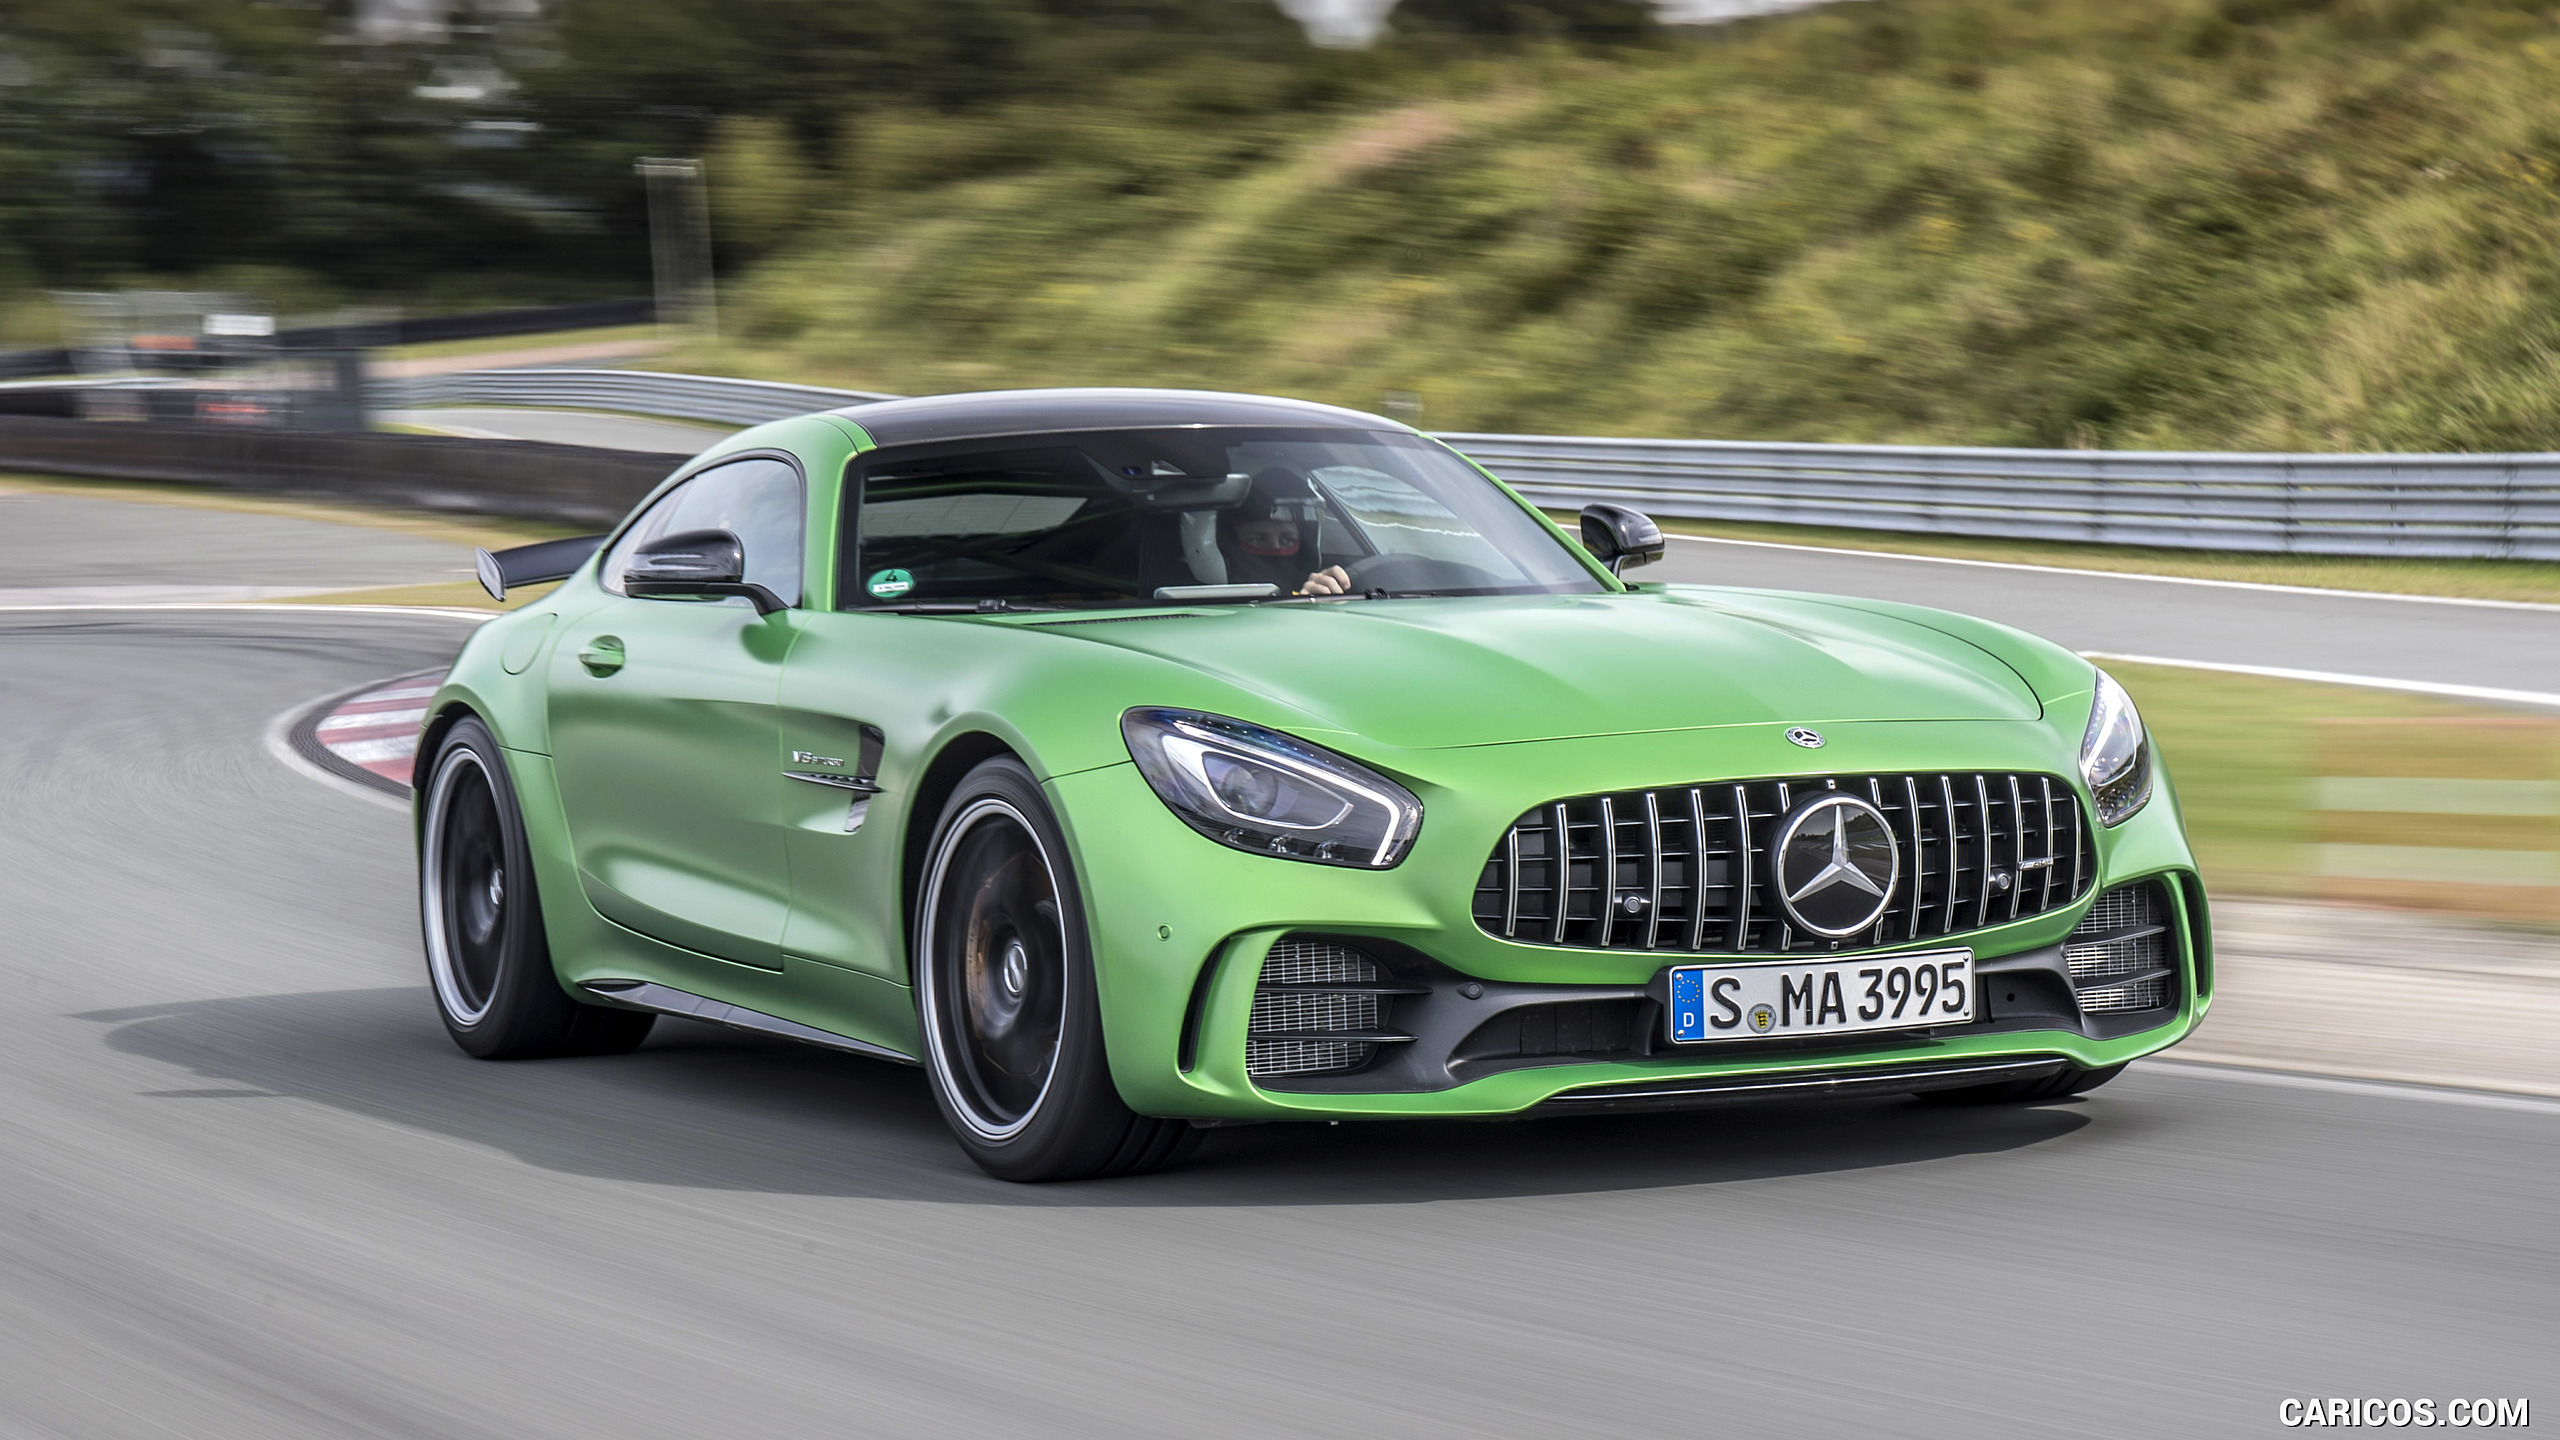 2017 Mercedes-AMG GT R Coupe - Front Three-Quarter, #137 of 182